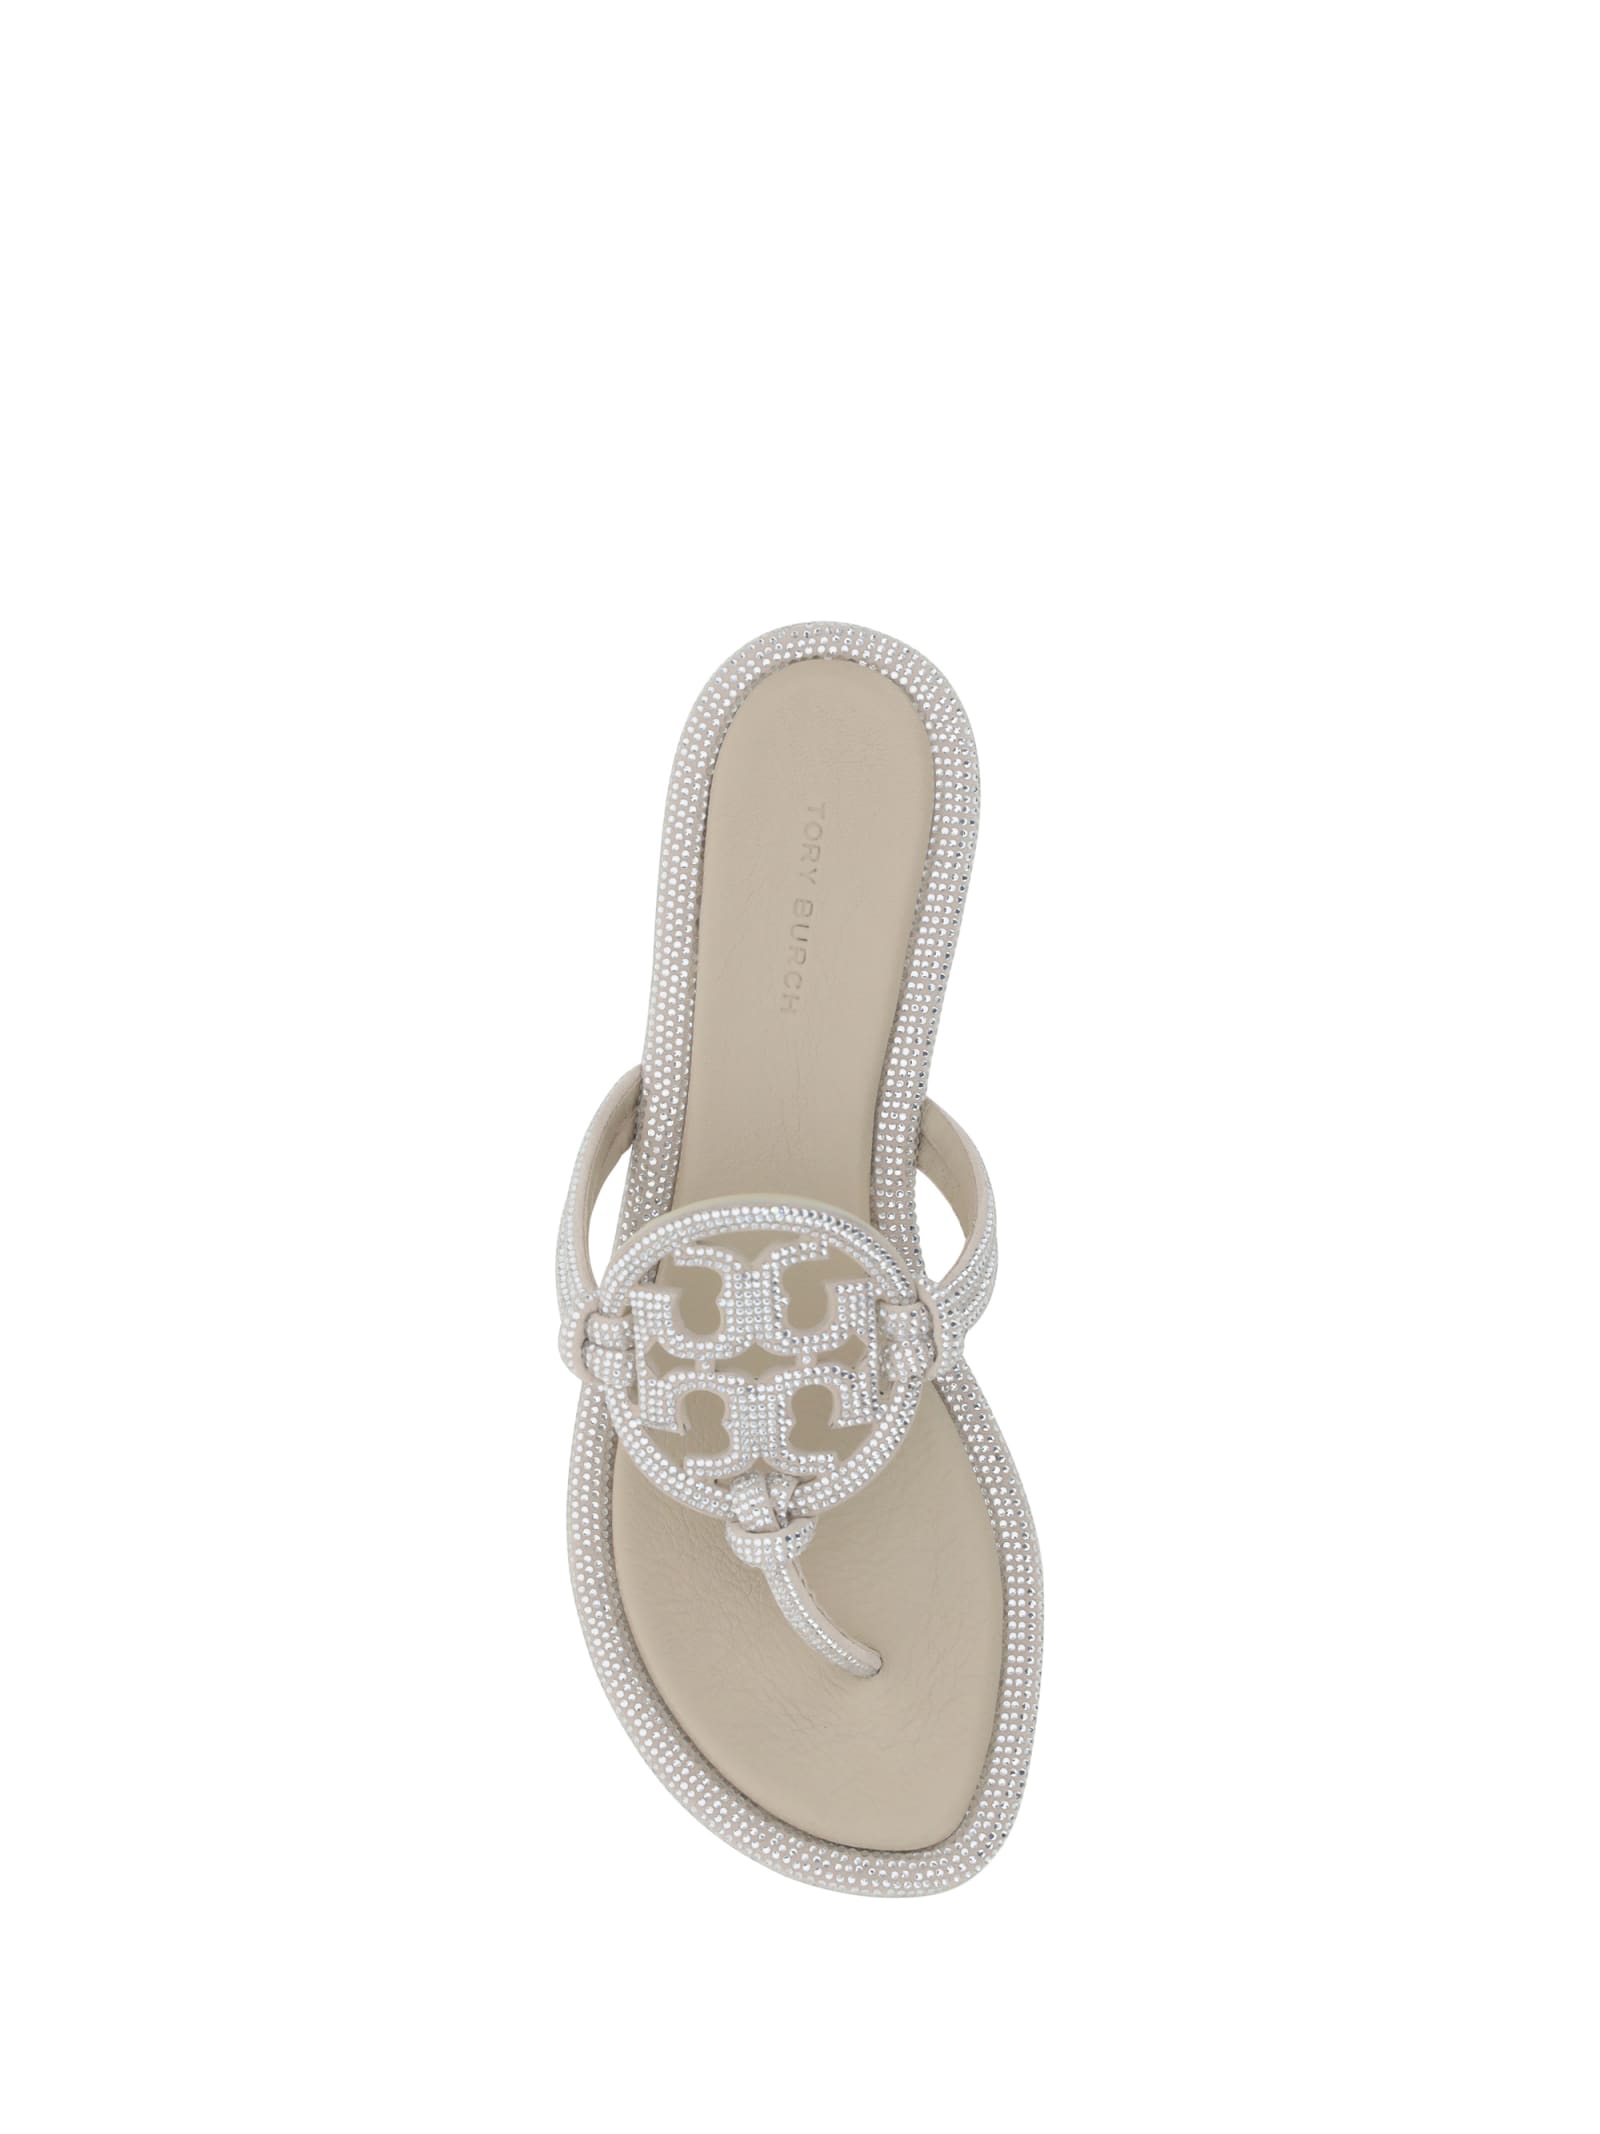 Shop Tory Burch Miller Sandals In Stone Gray